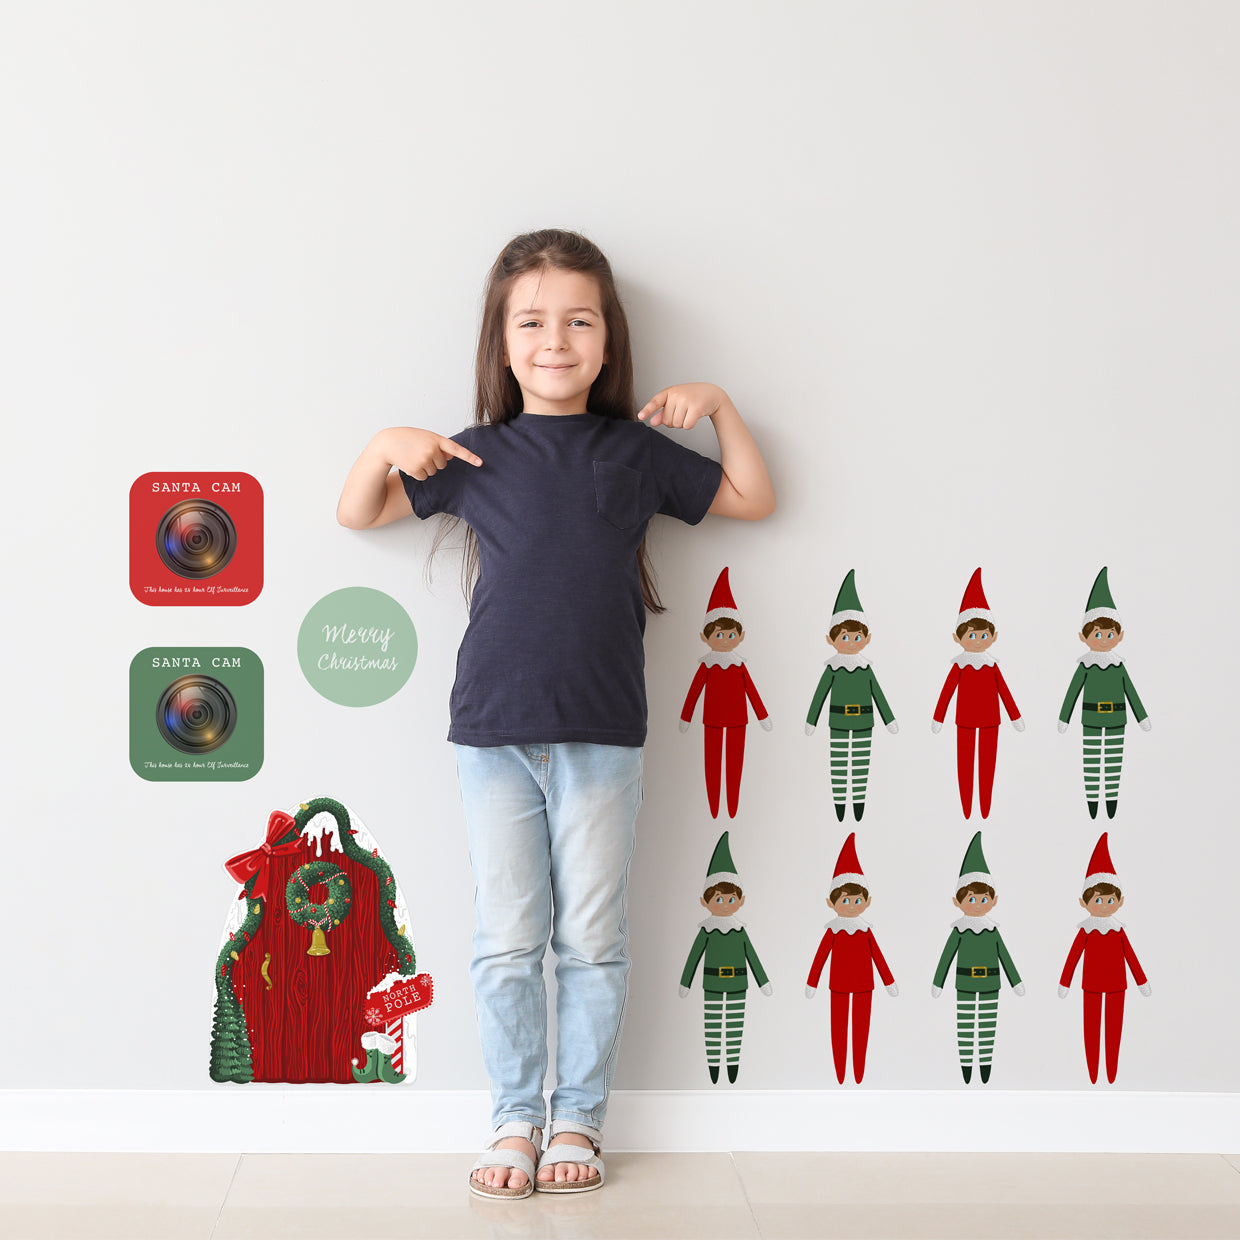 Christmas wall decals